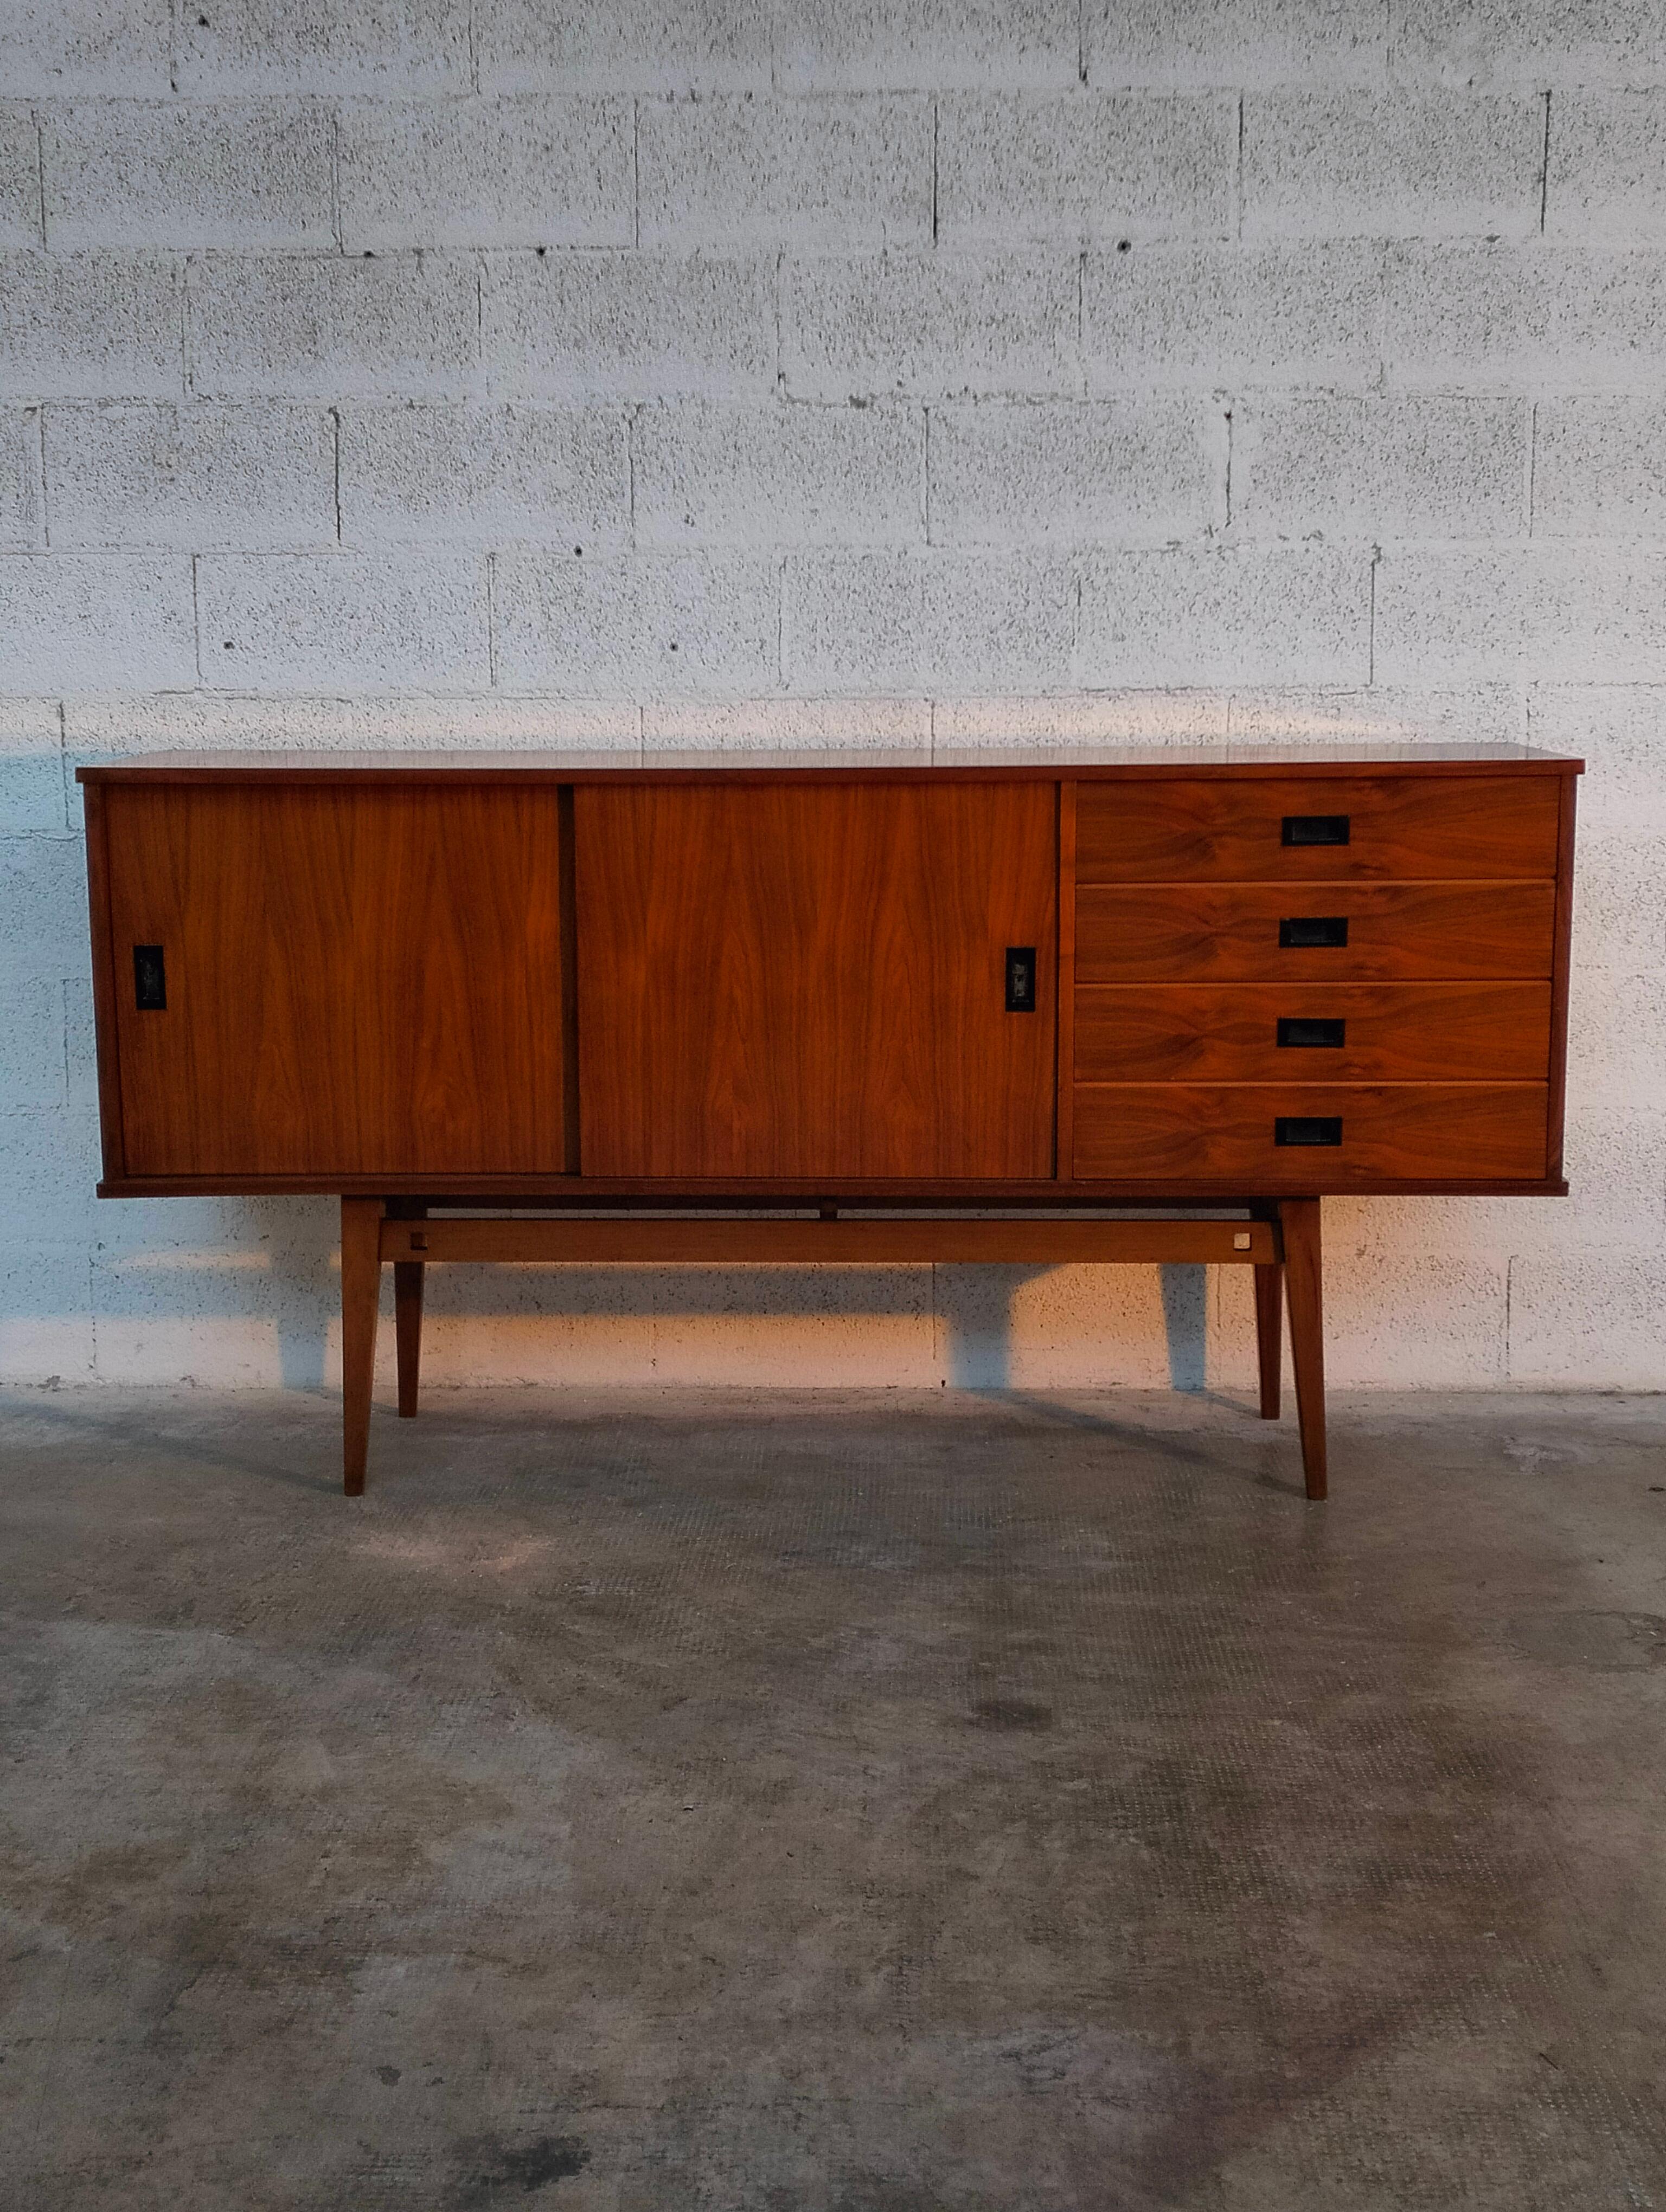 Nordic Scandinavian style teak sideboard from the 1960s.
Splendid example of a Scandinavian-style sideboard and Italian workmanship from the 1960s. Thanks to its essential and light design, this object can find a place in different contexts and